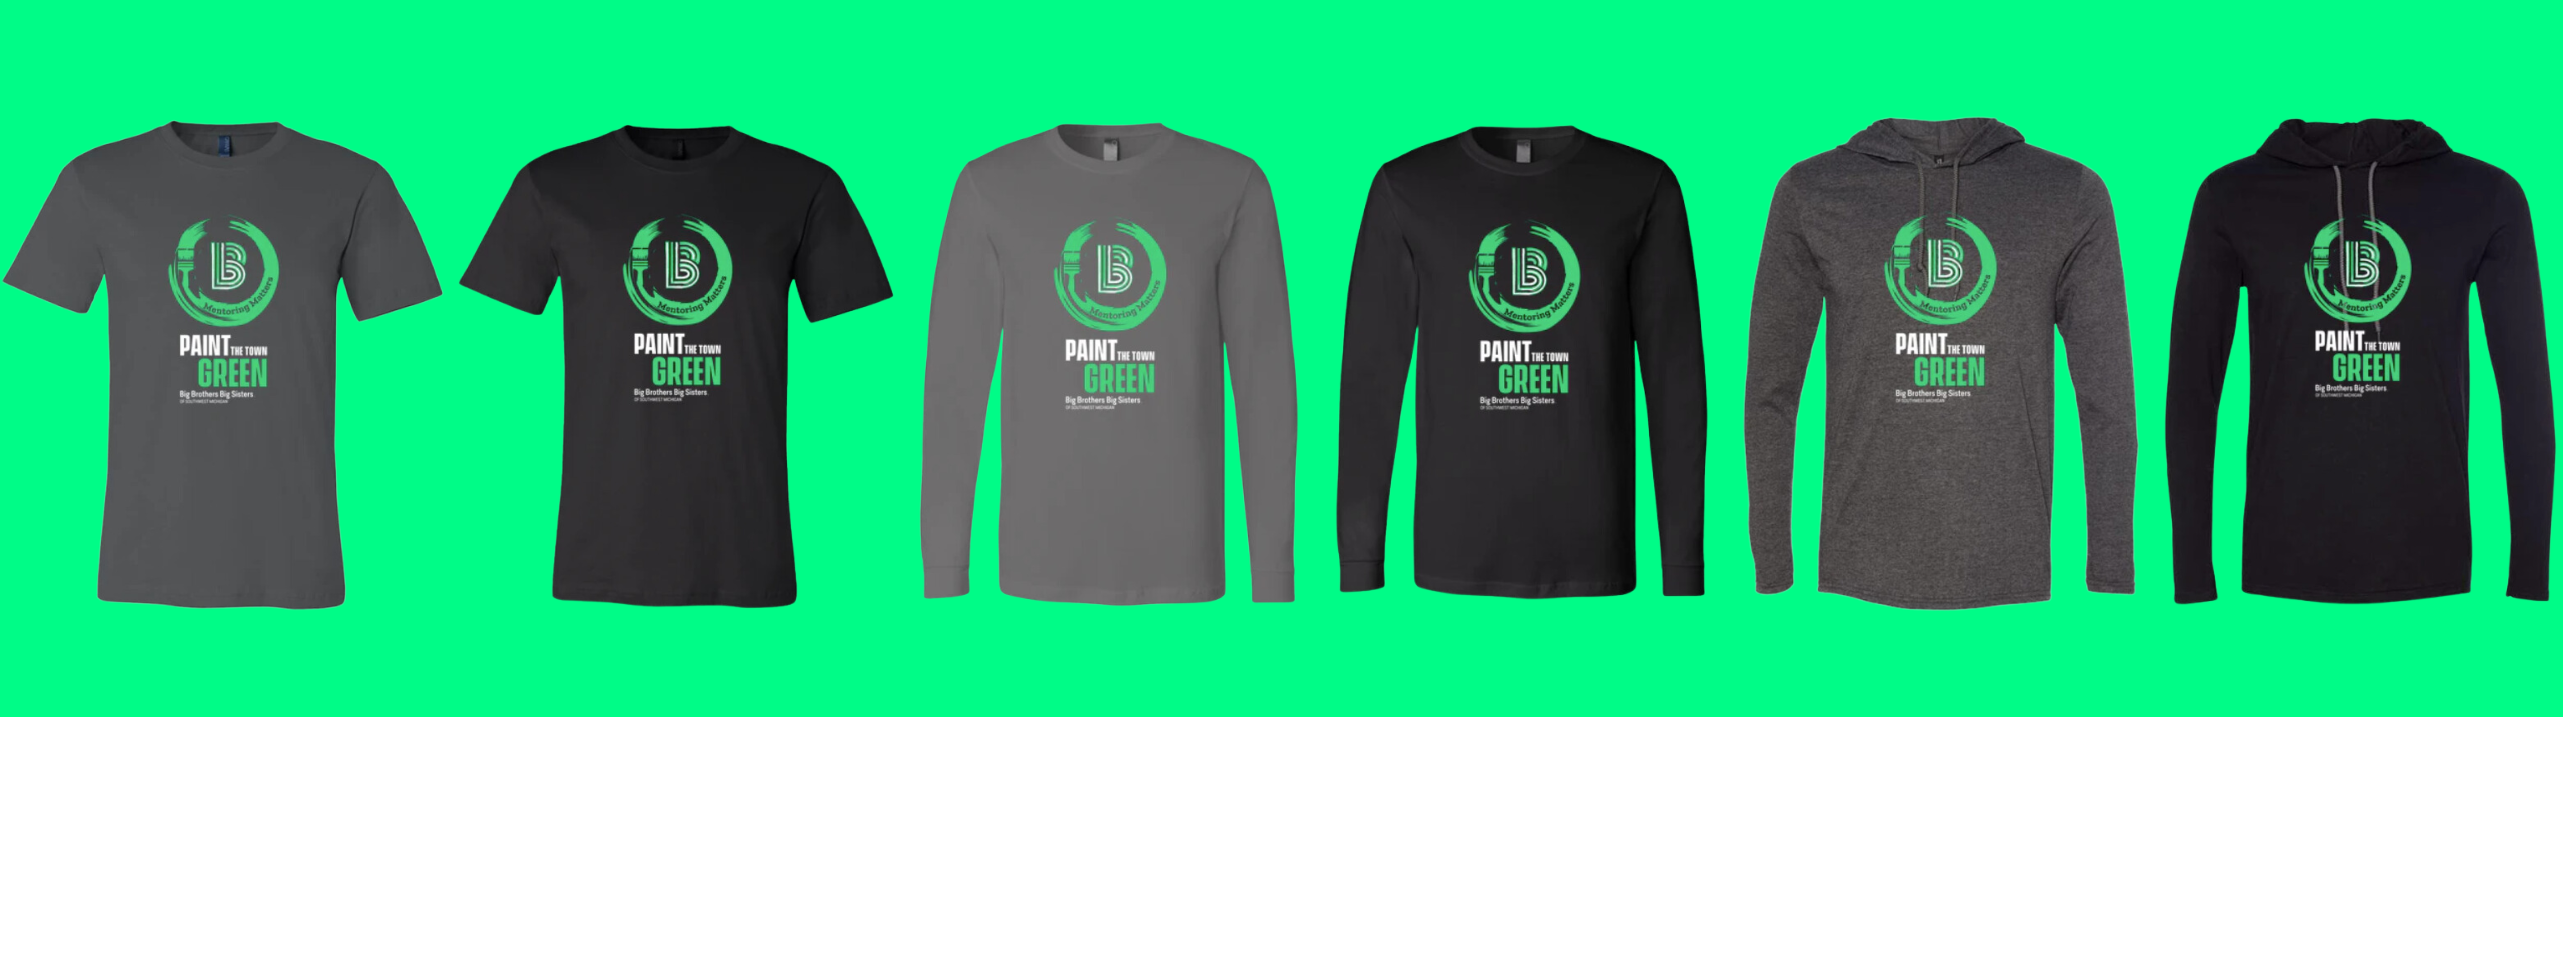 Paint the Town Green logo items for purchase!